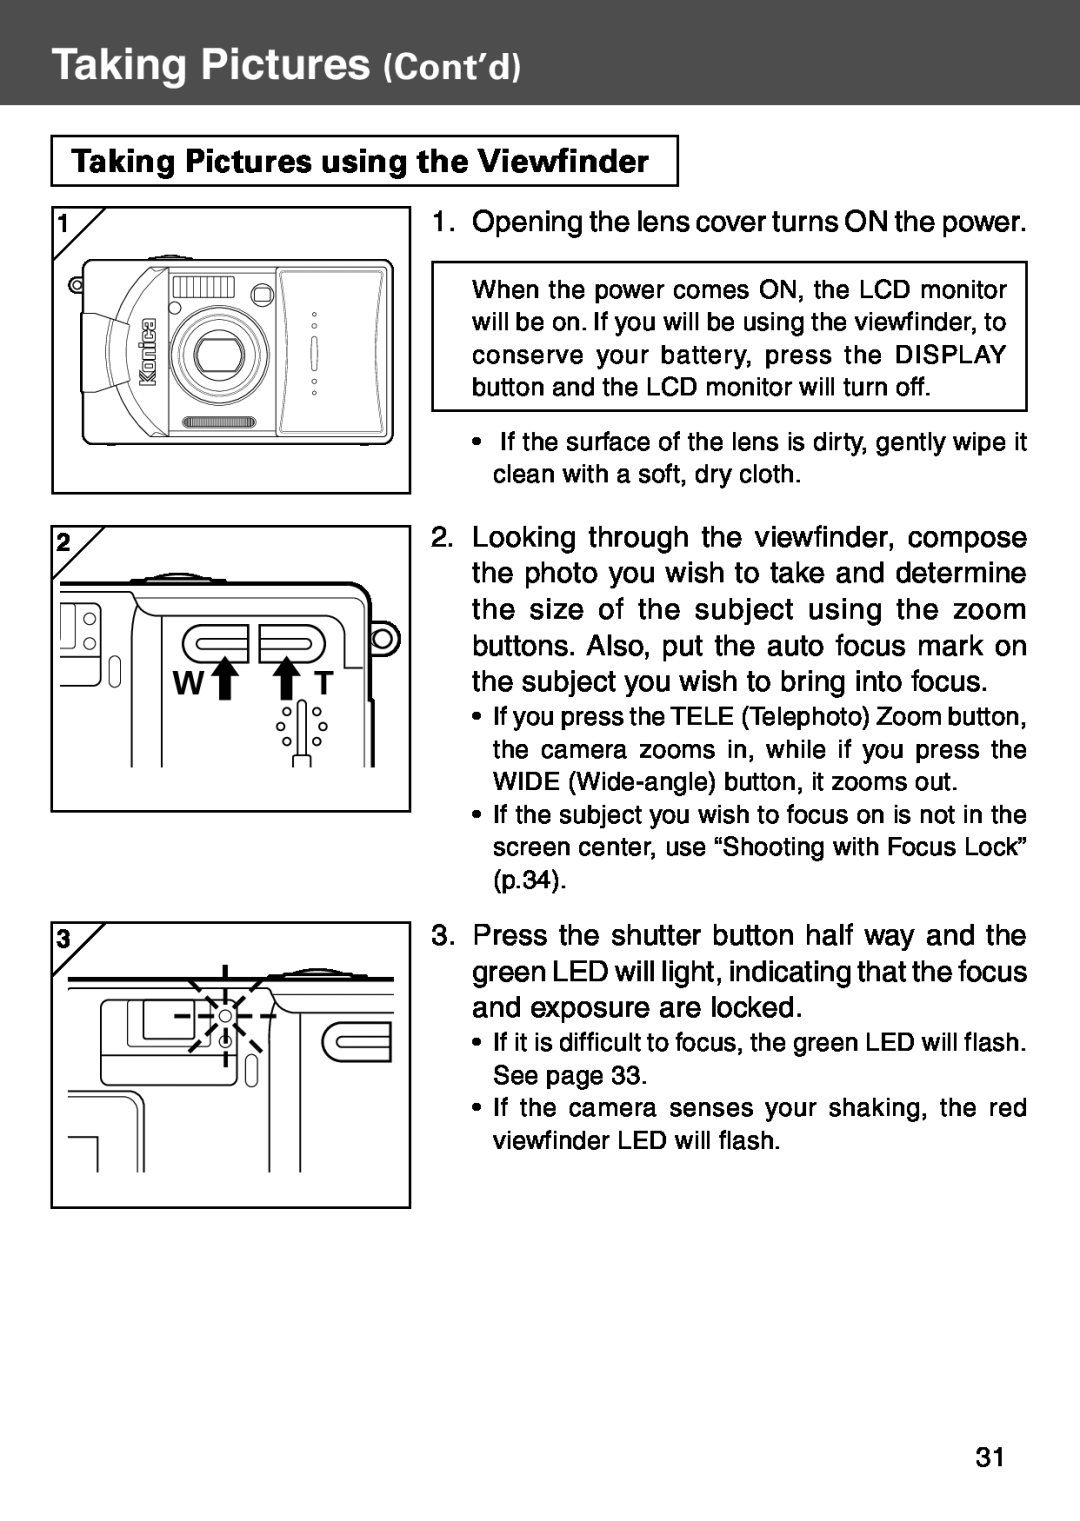 Konica Minolta KD-500Z user manual Taking Pictures using the Viewfinder, Taking Pictures Cont’d 